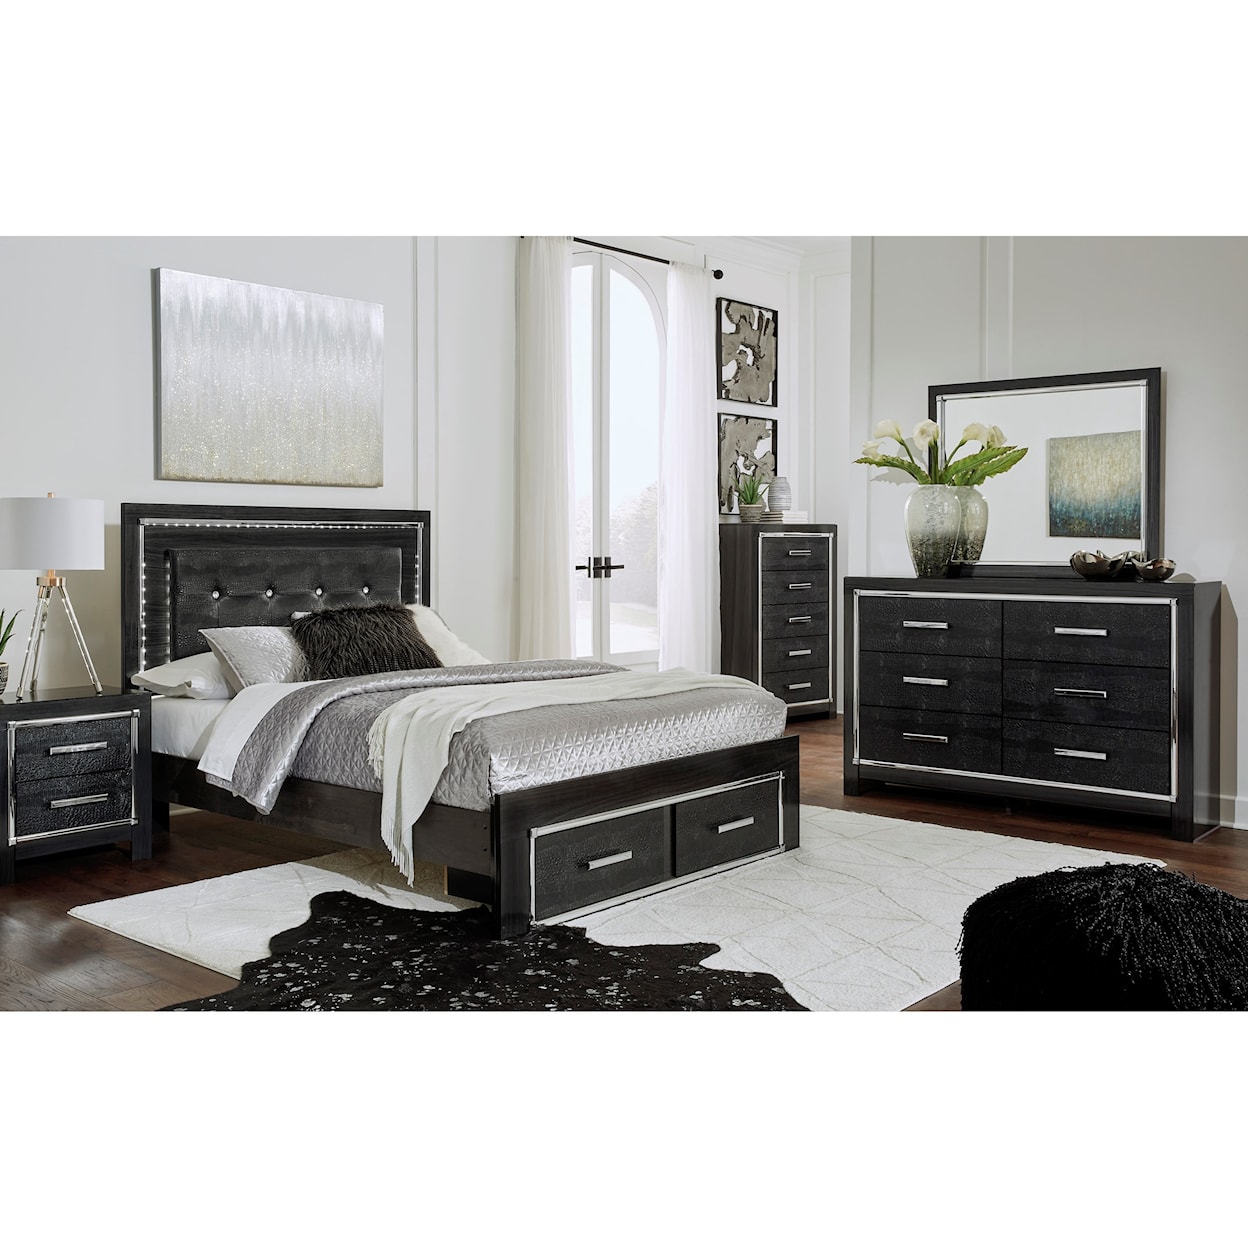 Signature Design by Ashley Kaydell Queen Bedroom Group